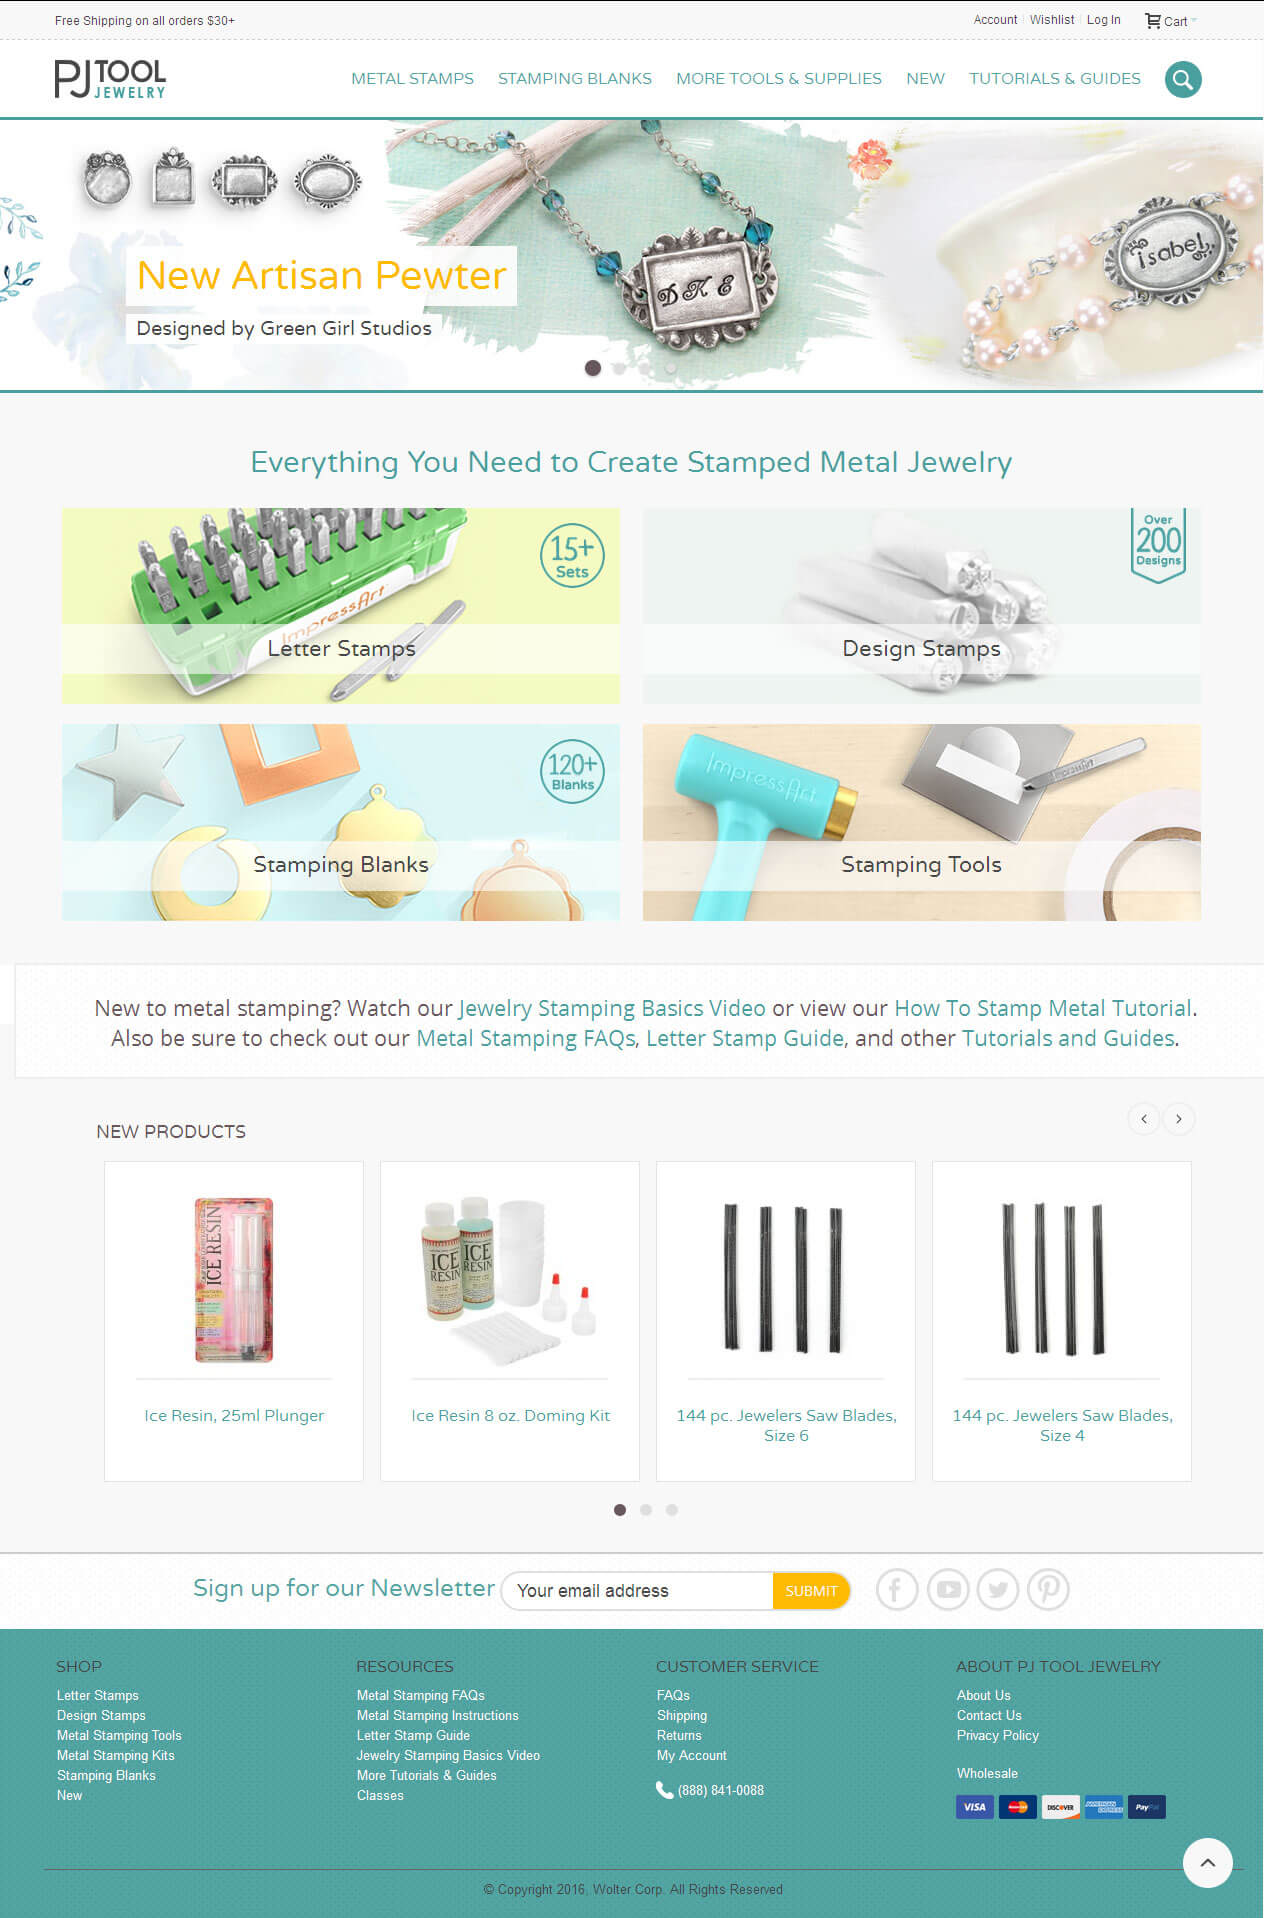  A Magento Based eCommerce Site for Selling Jewelry Making Tools